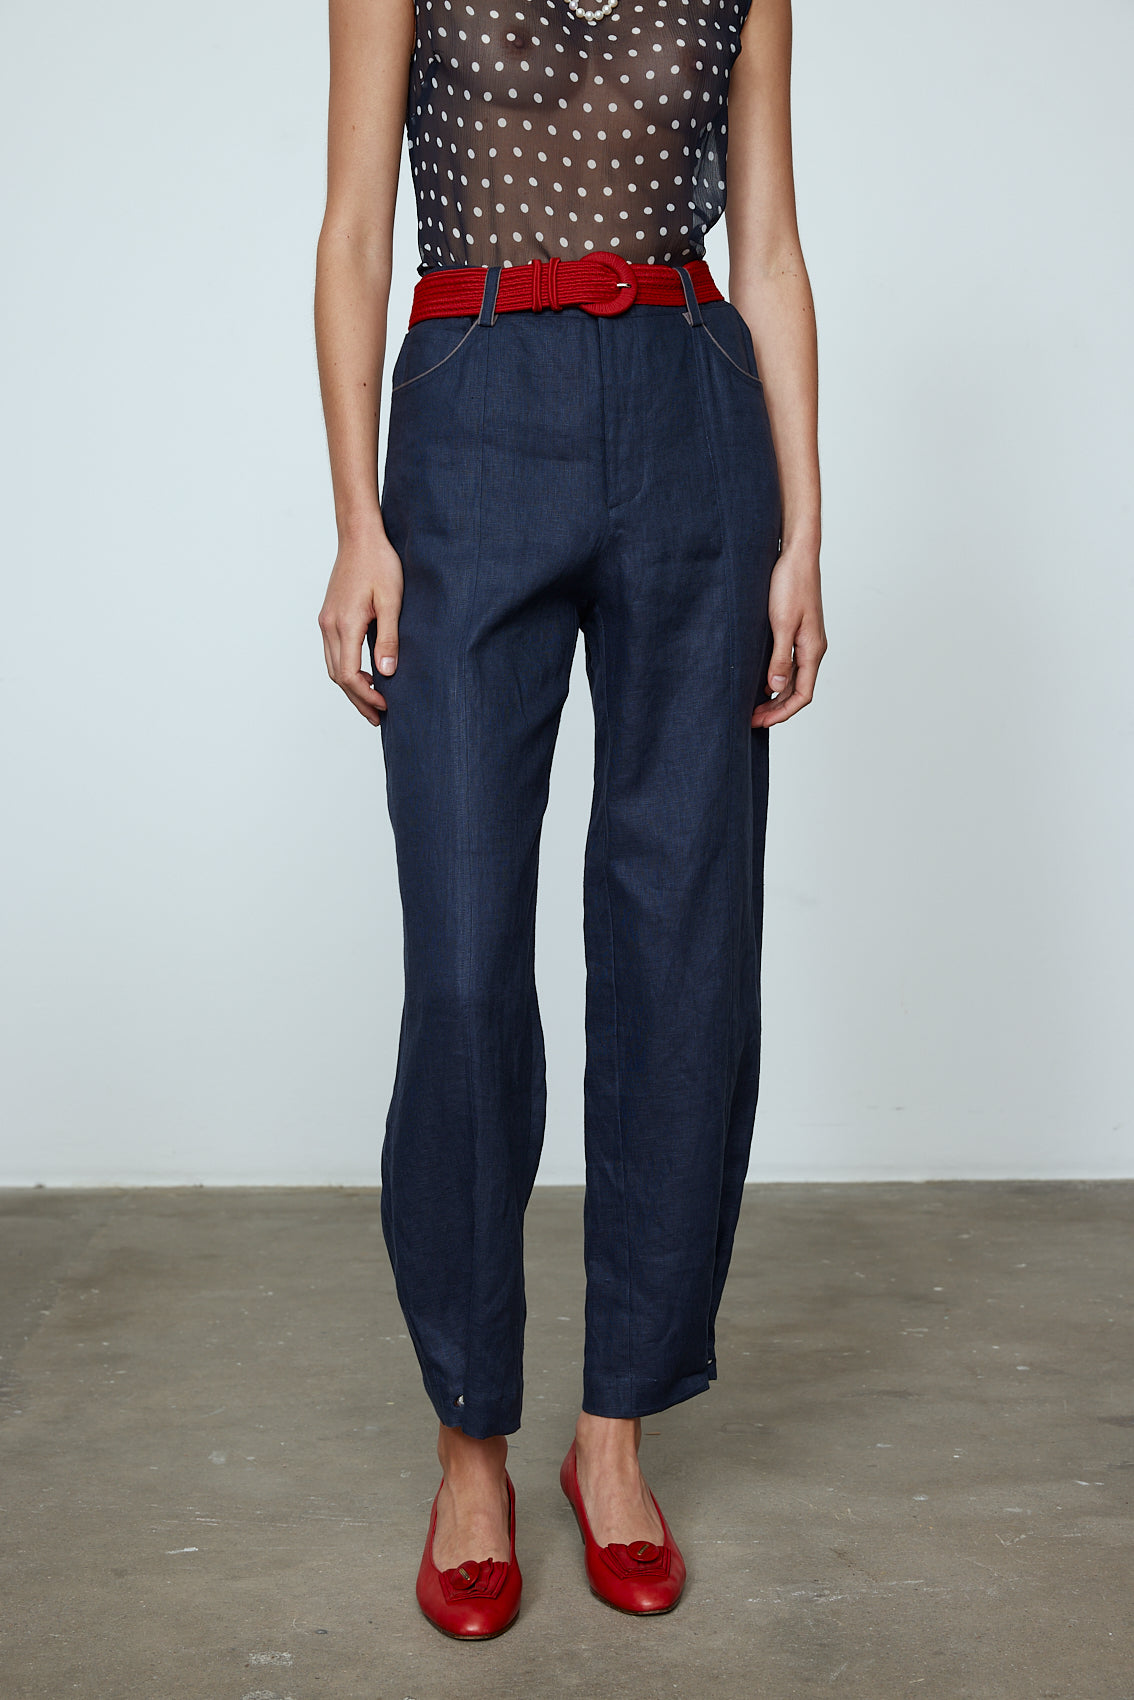 The Emma Pants in Navy Linen. The pants feature cargo details on the side and large pockets with piping details in a contrasting color. Easily modify the shape of the pants with a button adjustment.  Style them with a t-shirt, blouse, or a matching Emma Jacket in Navy Linen.   Also available in Pink and Orange.  Material: 100% linen. Lining: 100% viscose.